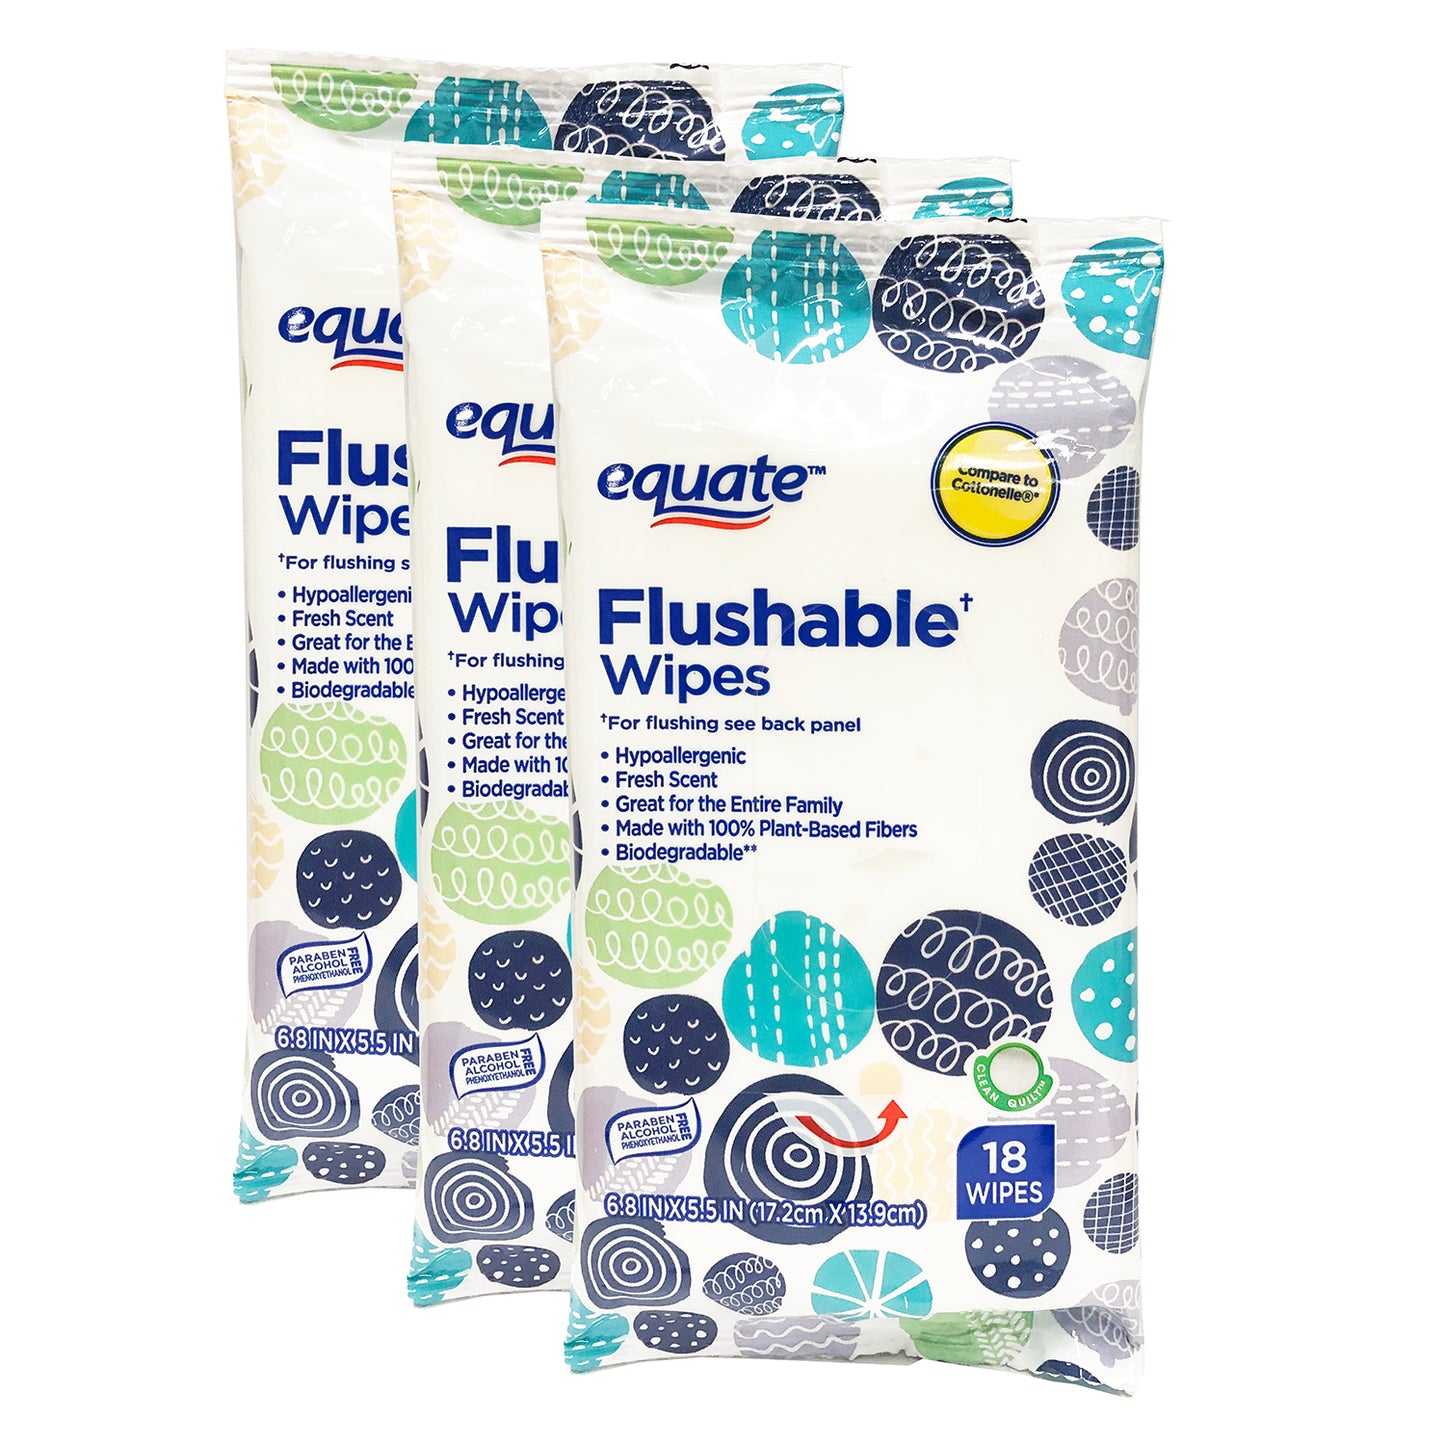 Equate Fresh Scent Flushable Wipes 18 ct "3-PACK"